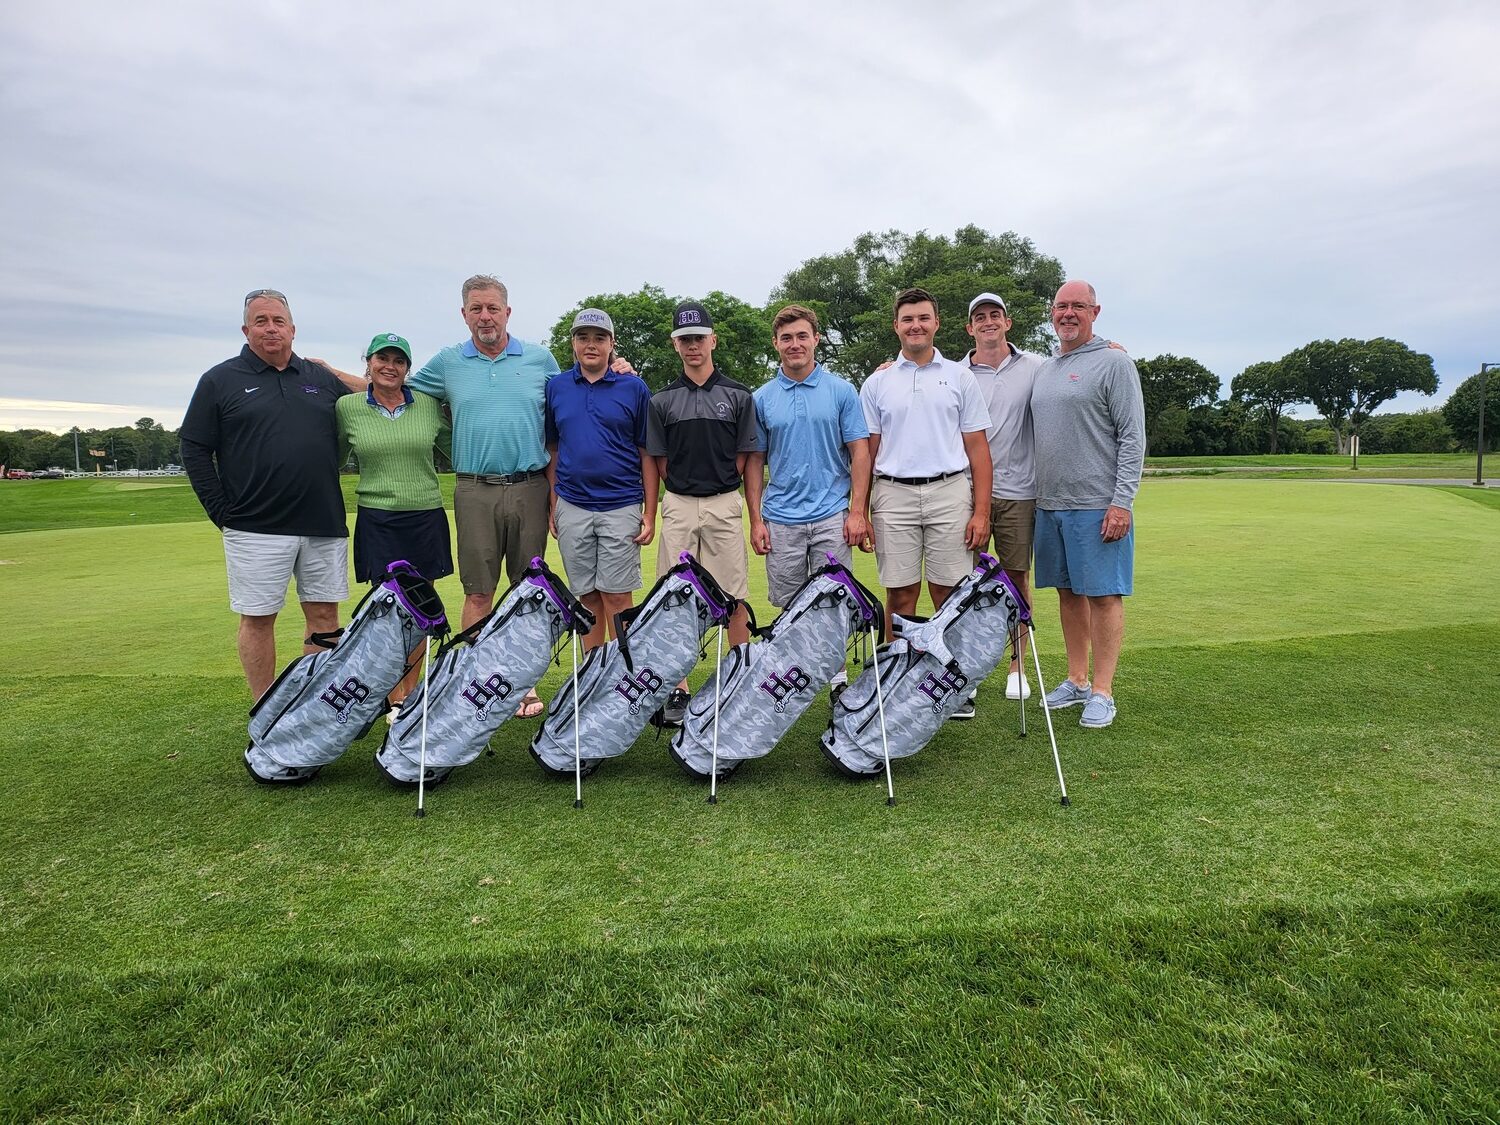 The Hampton Bays golf team was donated new bags  by the Eugene Francolini Golf Initiative through the AJJ Scholarship Fund at Indian Island Golf Course in Riverhead.